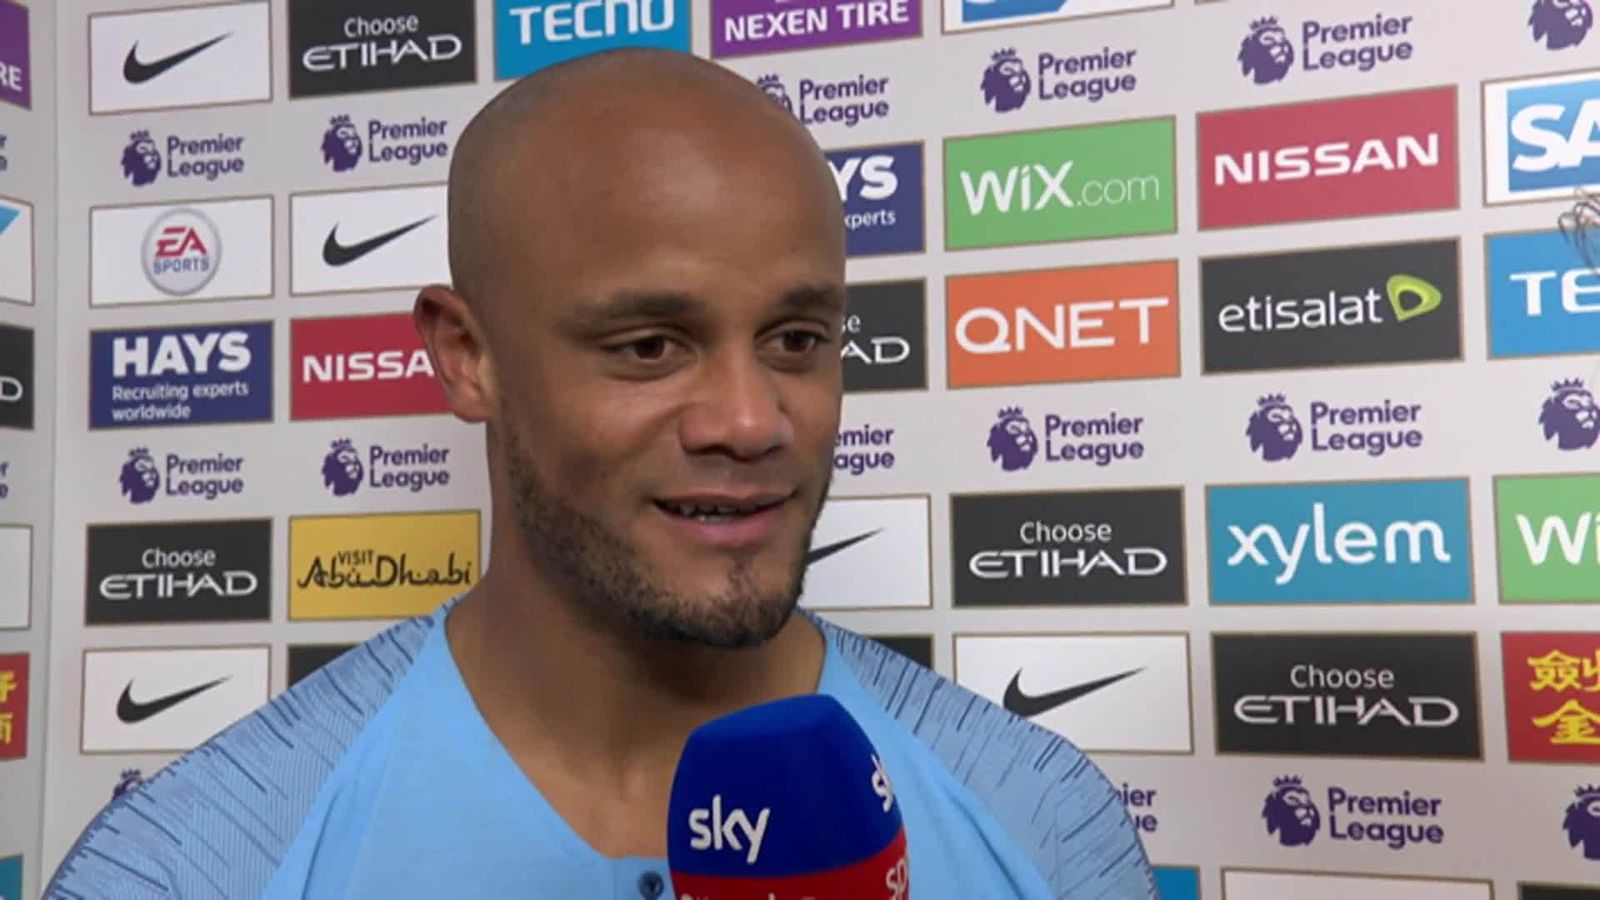 Vincent Kompany S Screamer From All Angles During Man City S Win Over Leicester Football News